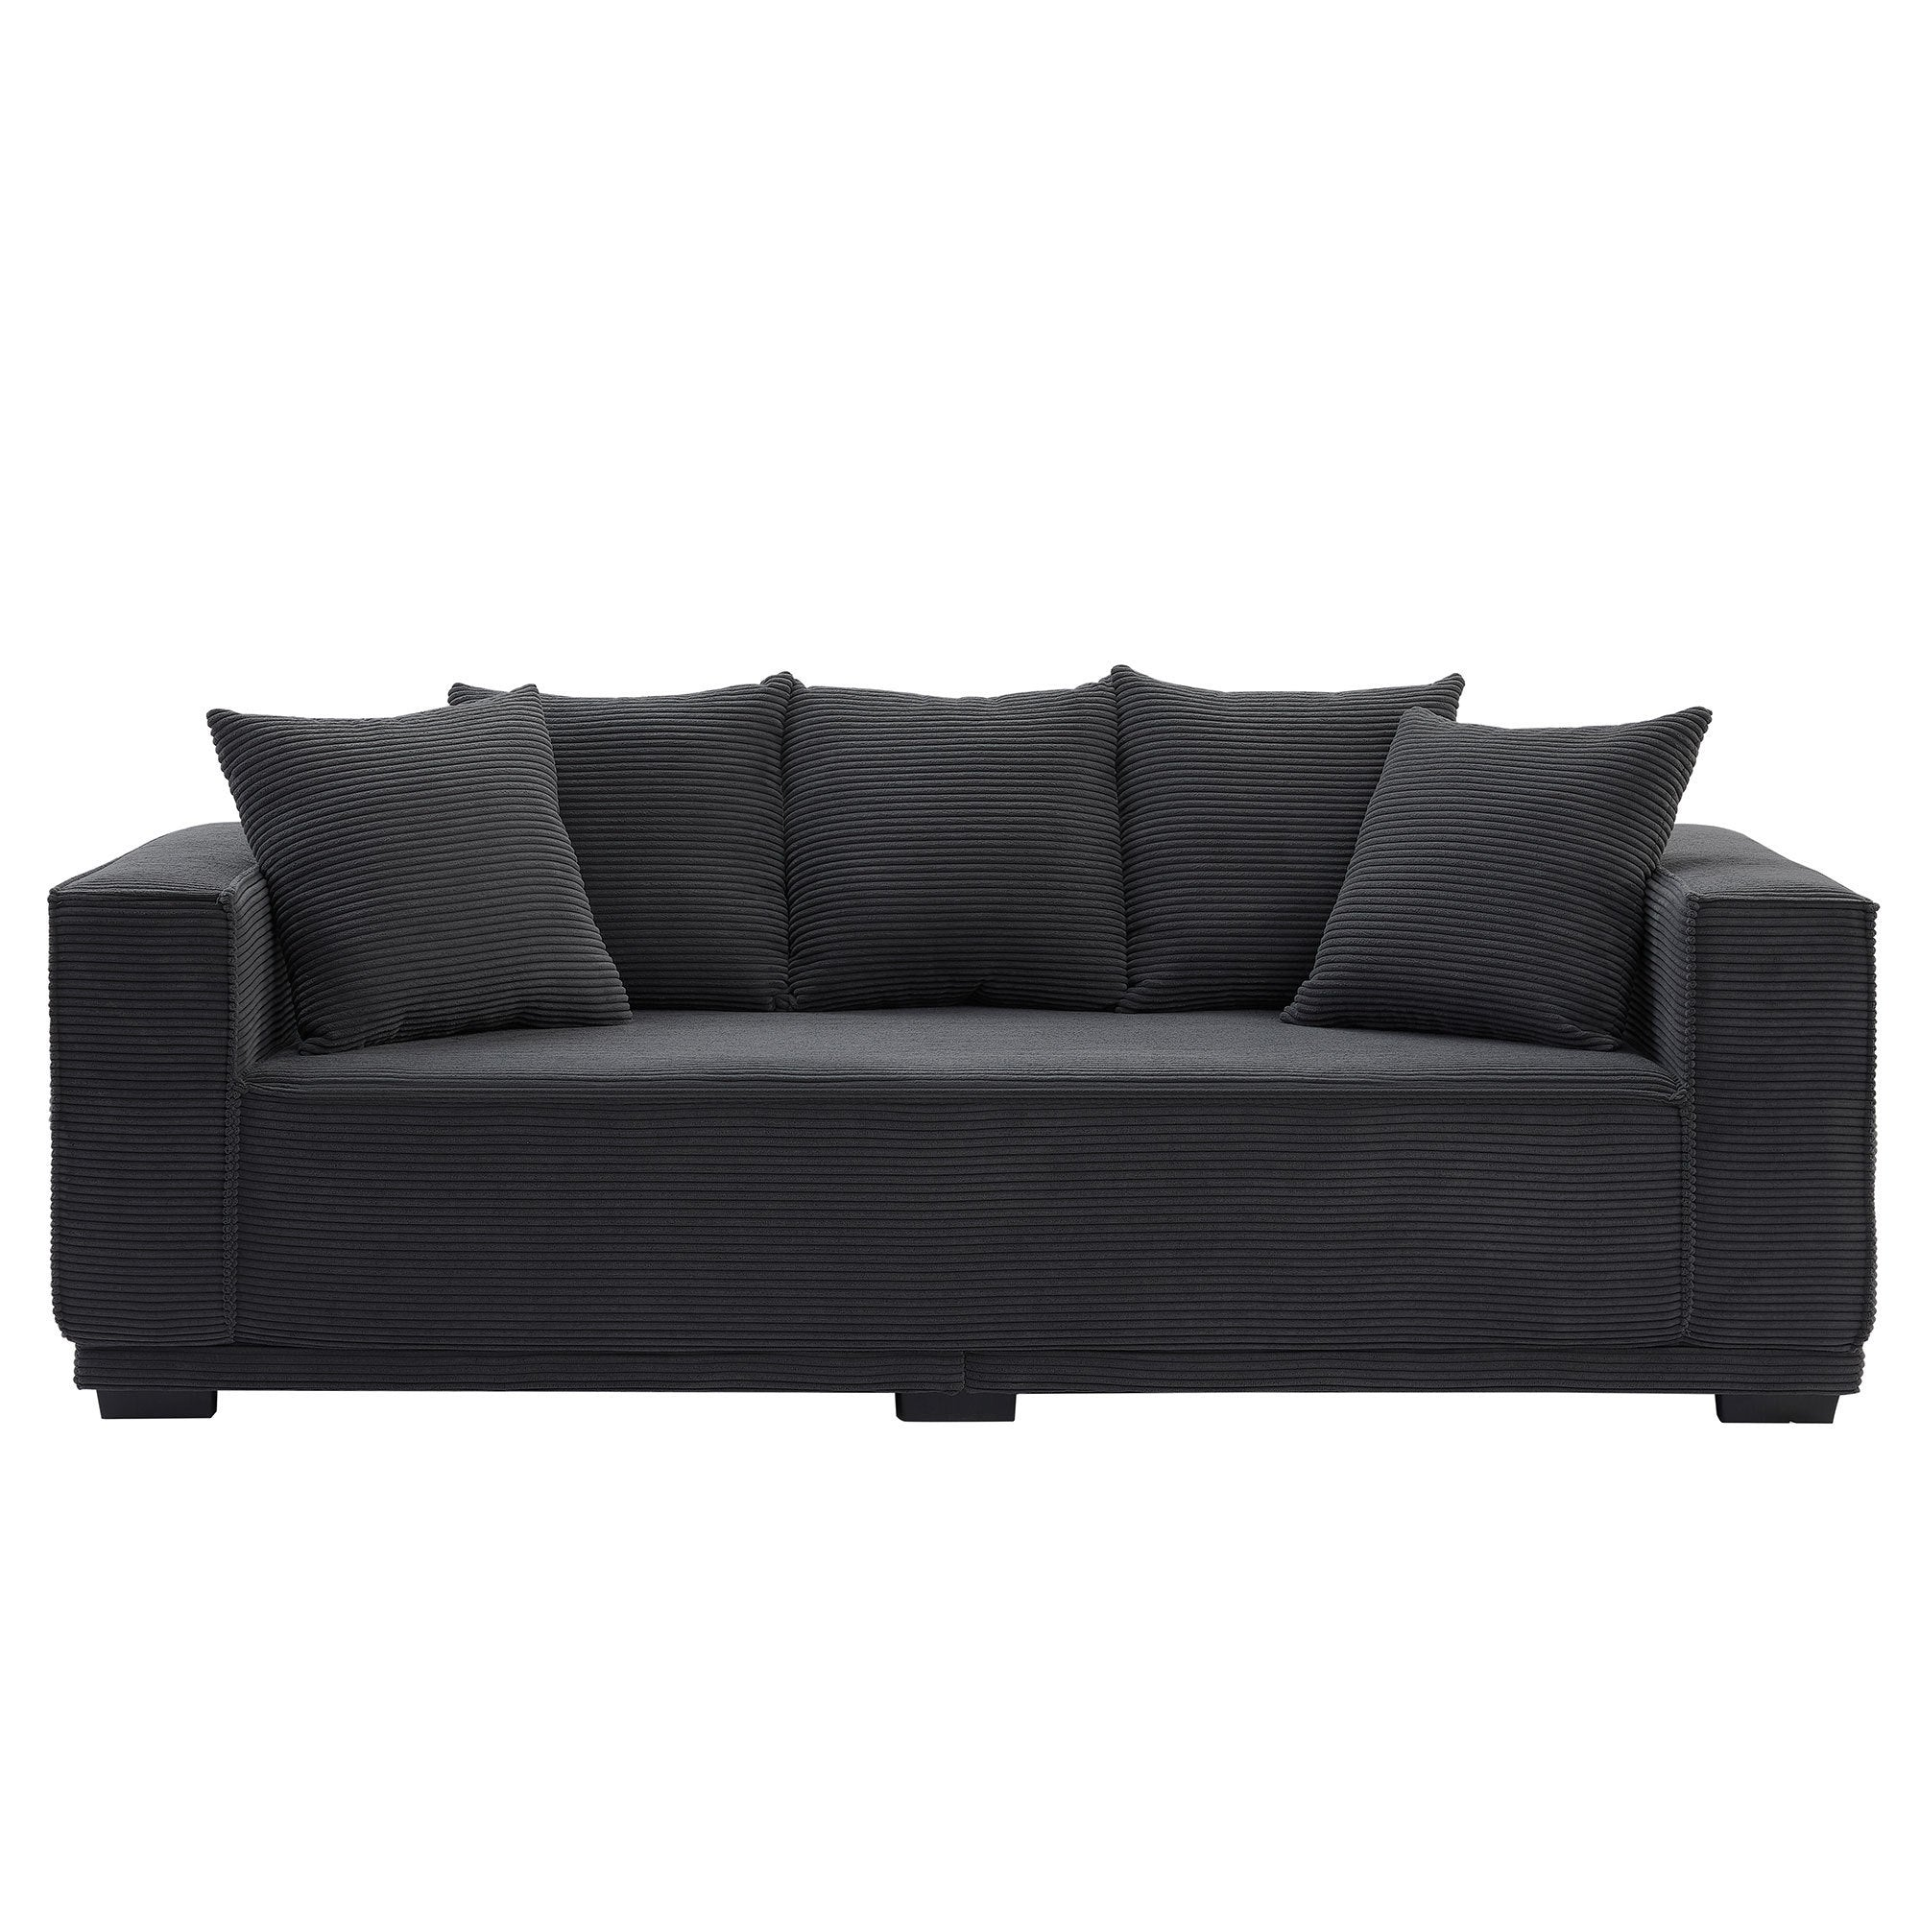 88.97'' Mid Century Modern Upholstered Sofa  with 5 Matching Toss Pillows, Including bottom frame,Comfy Couches  for Living Room, Bedroom, Apartment and Office.BLACK, Goodies N Stuff